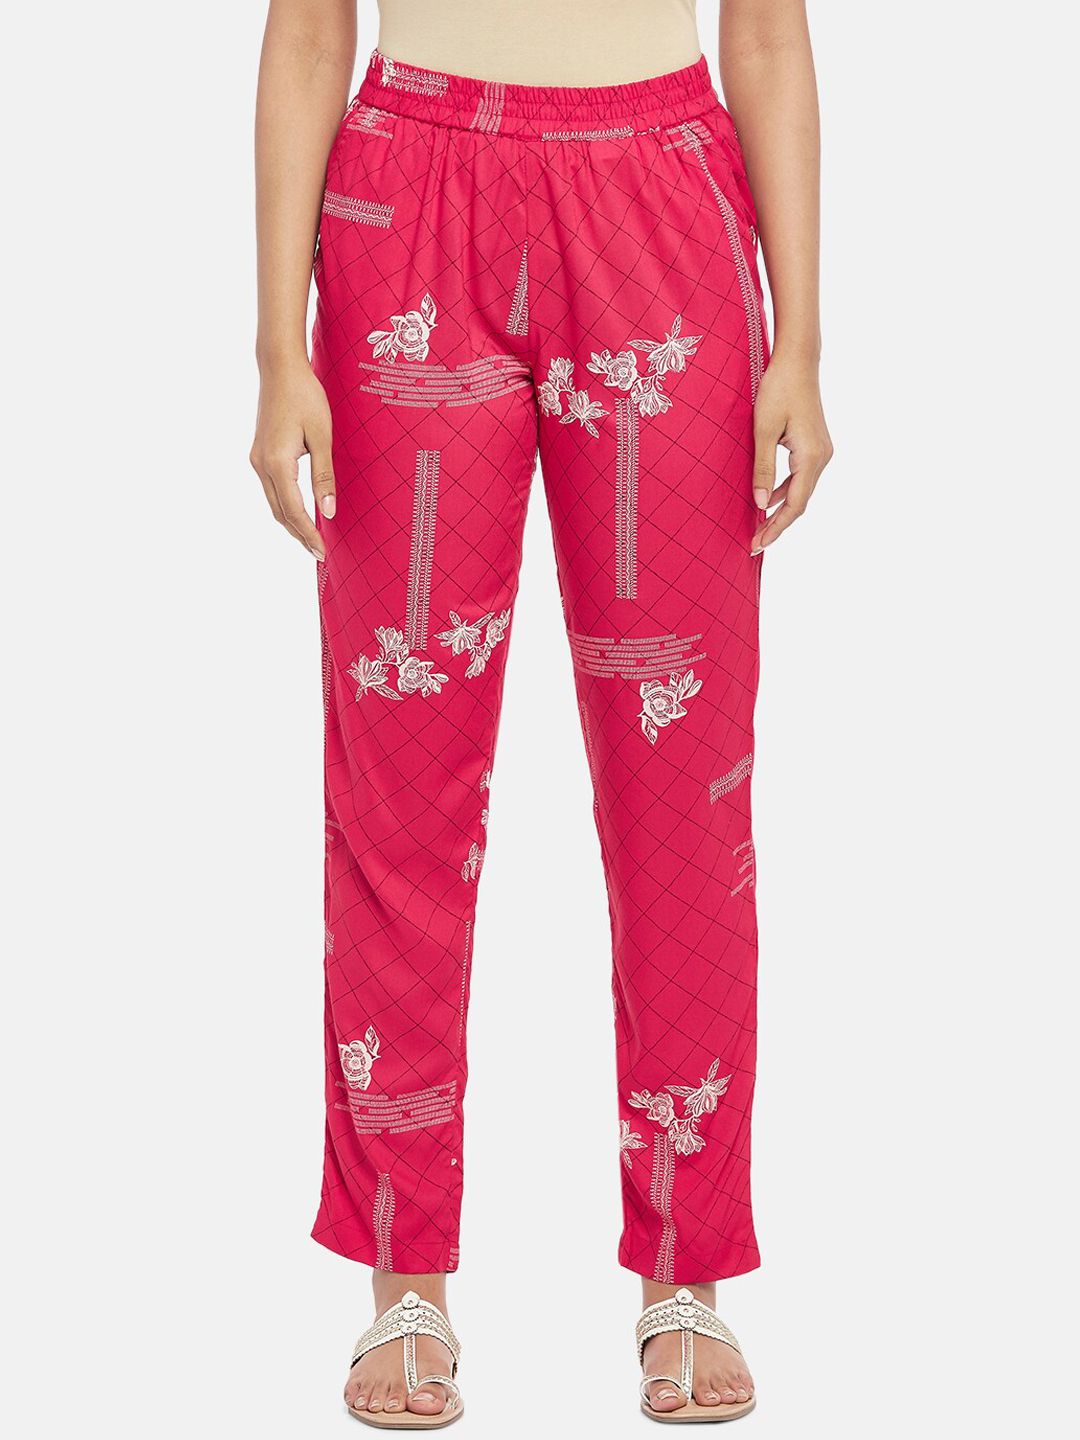 AKKRITI BY PANTALOONS Women Fuchsia Pink & White Floral Printed Pure Cotton Trousers Price in India